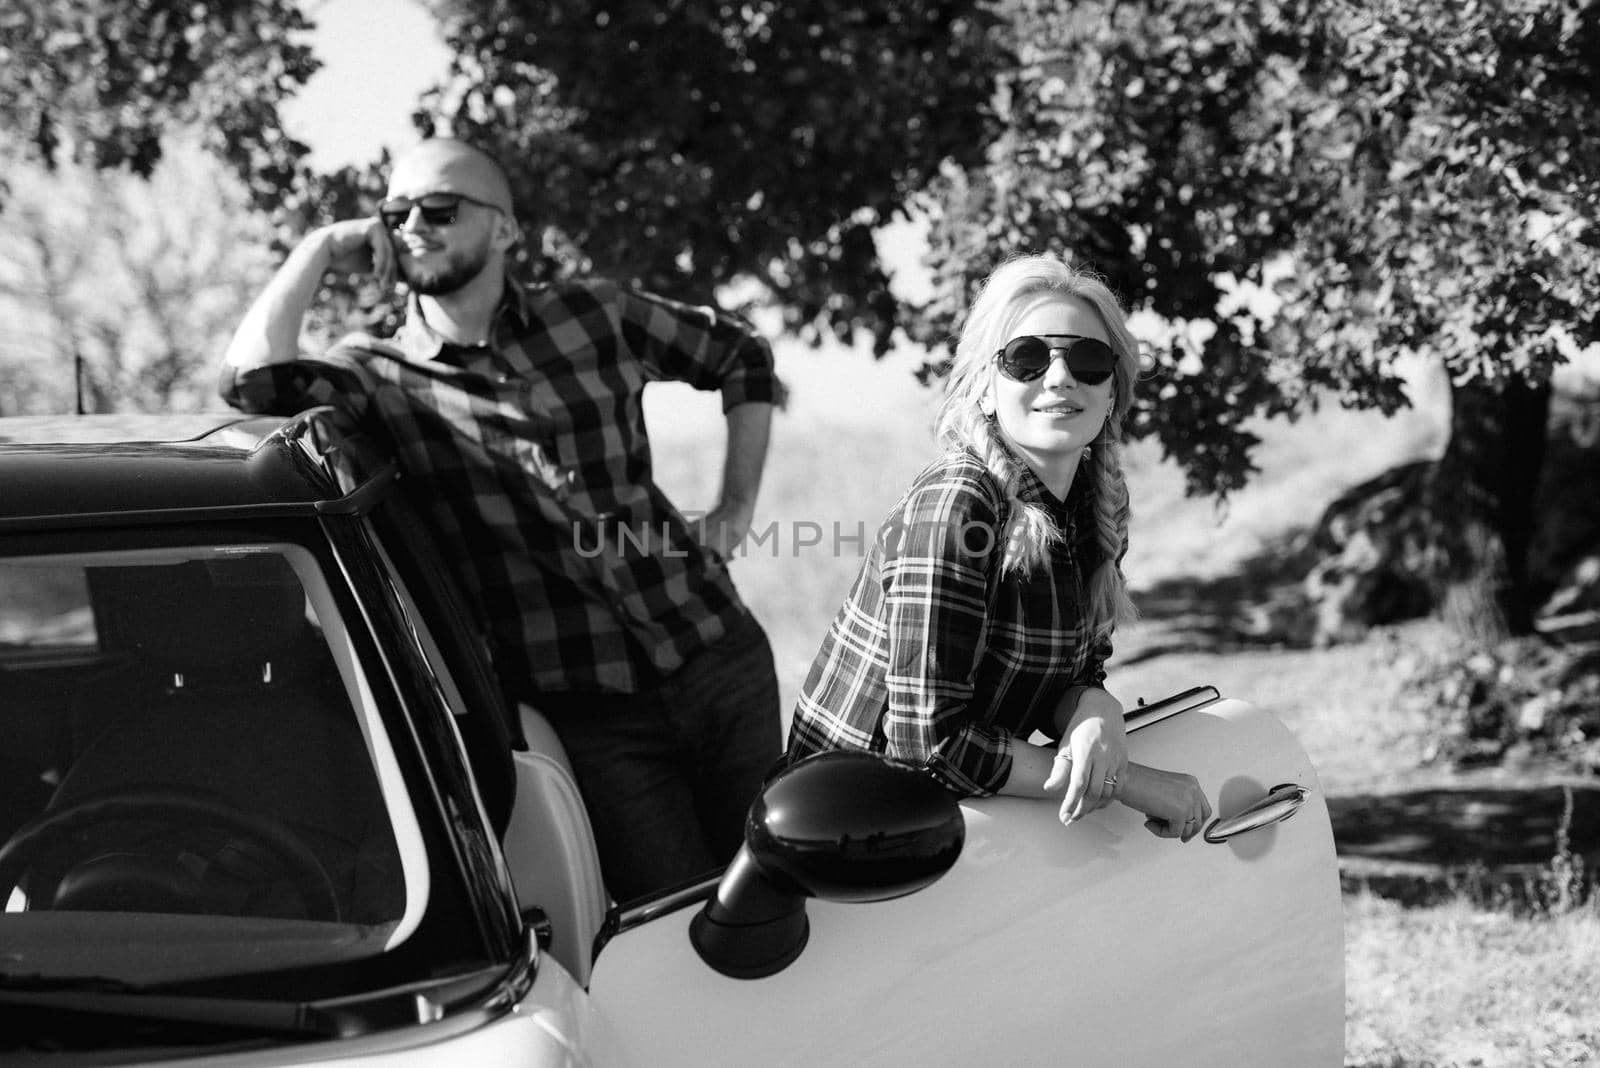 traveling by car of a young couple of a guy and a girl in plaid shirts